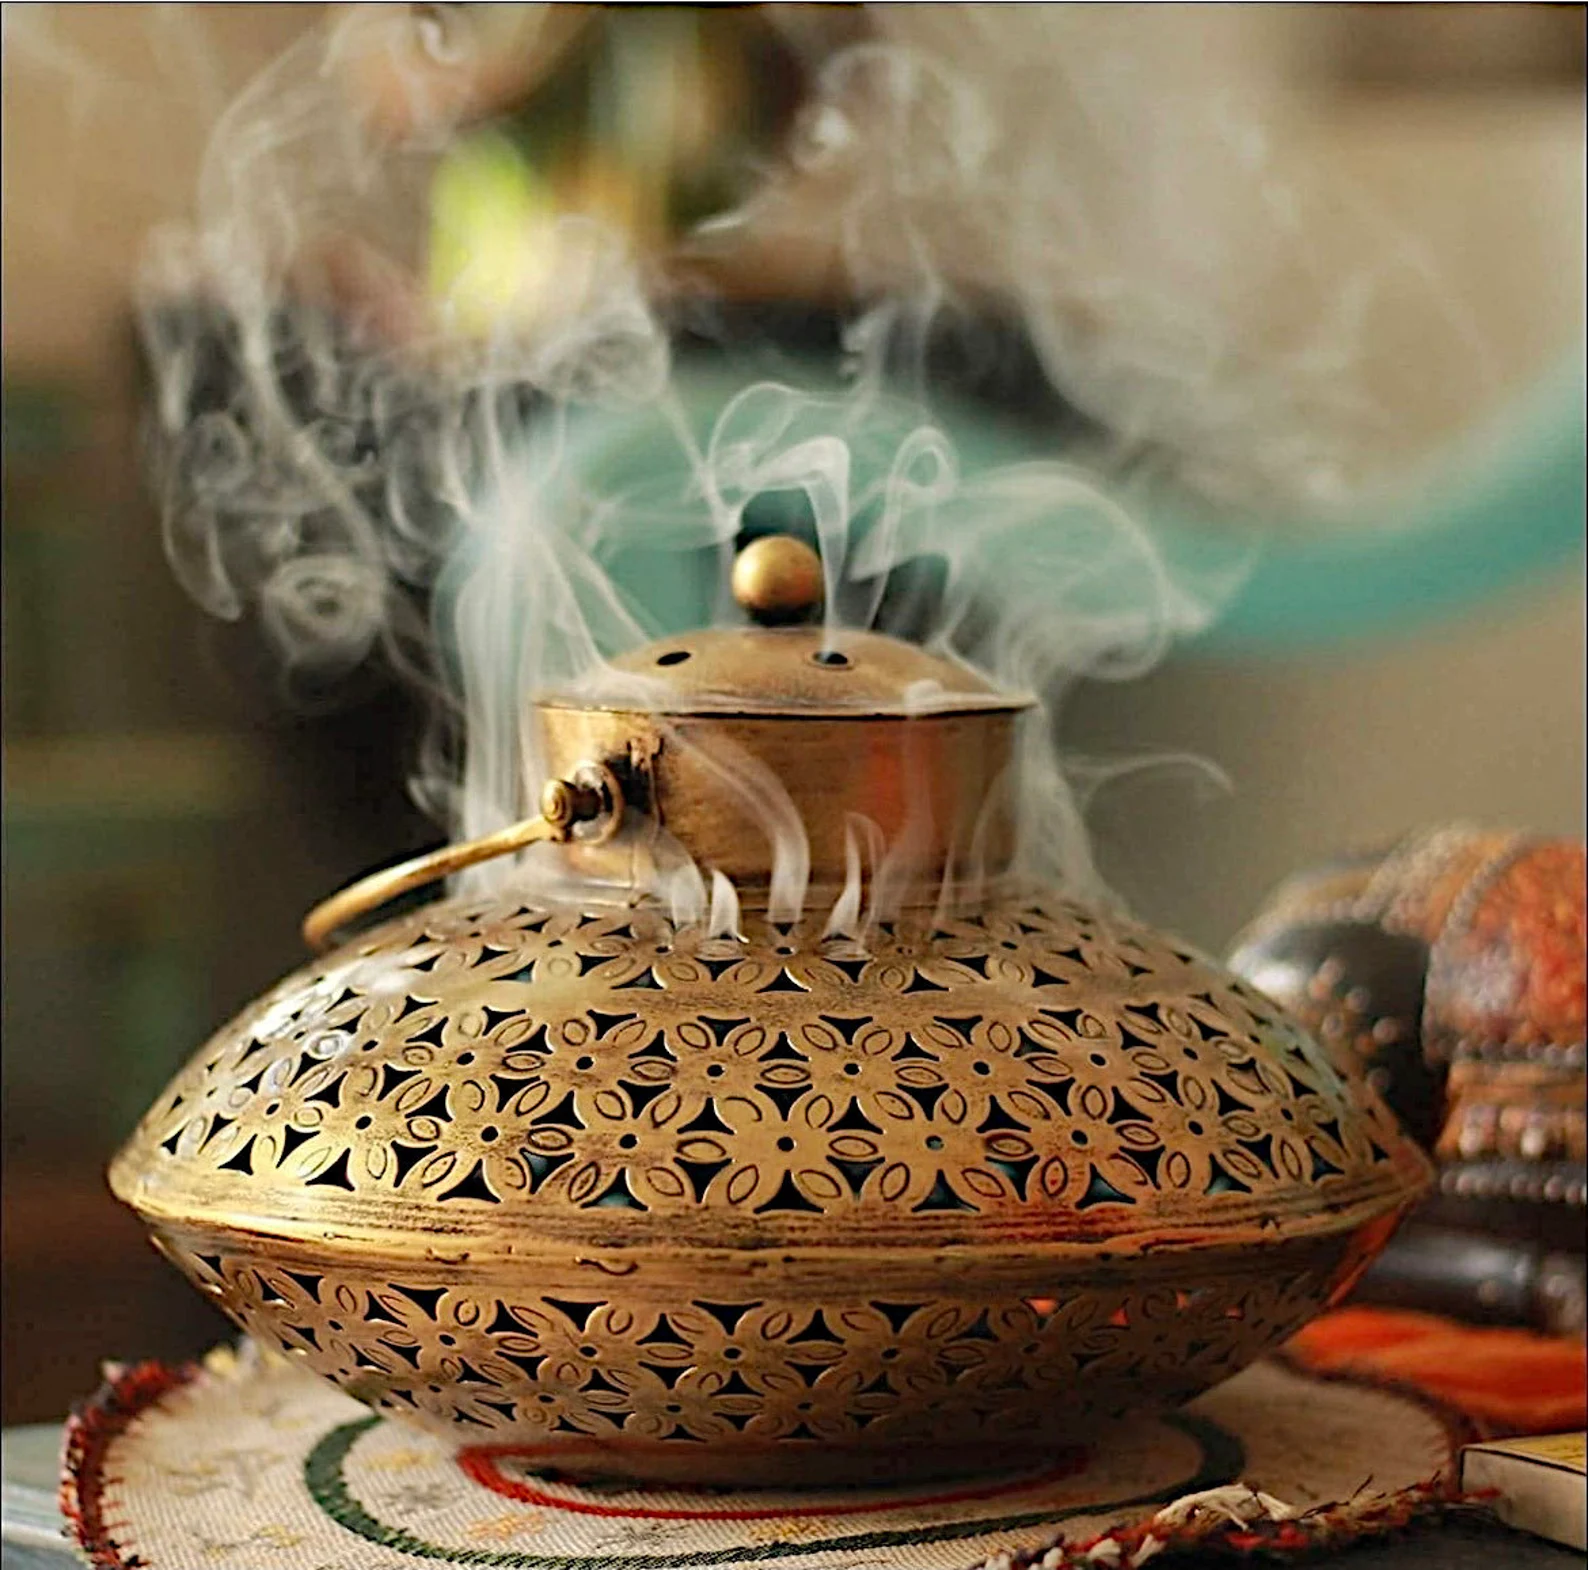 A hanging incense burner makes for a perfect spiritual gift because it helps to create a sacred space and fell.